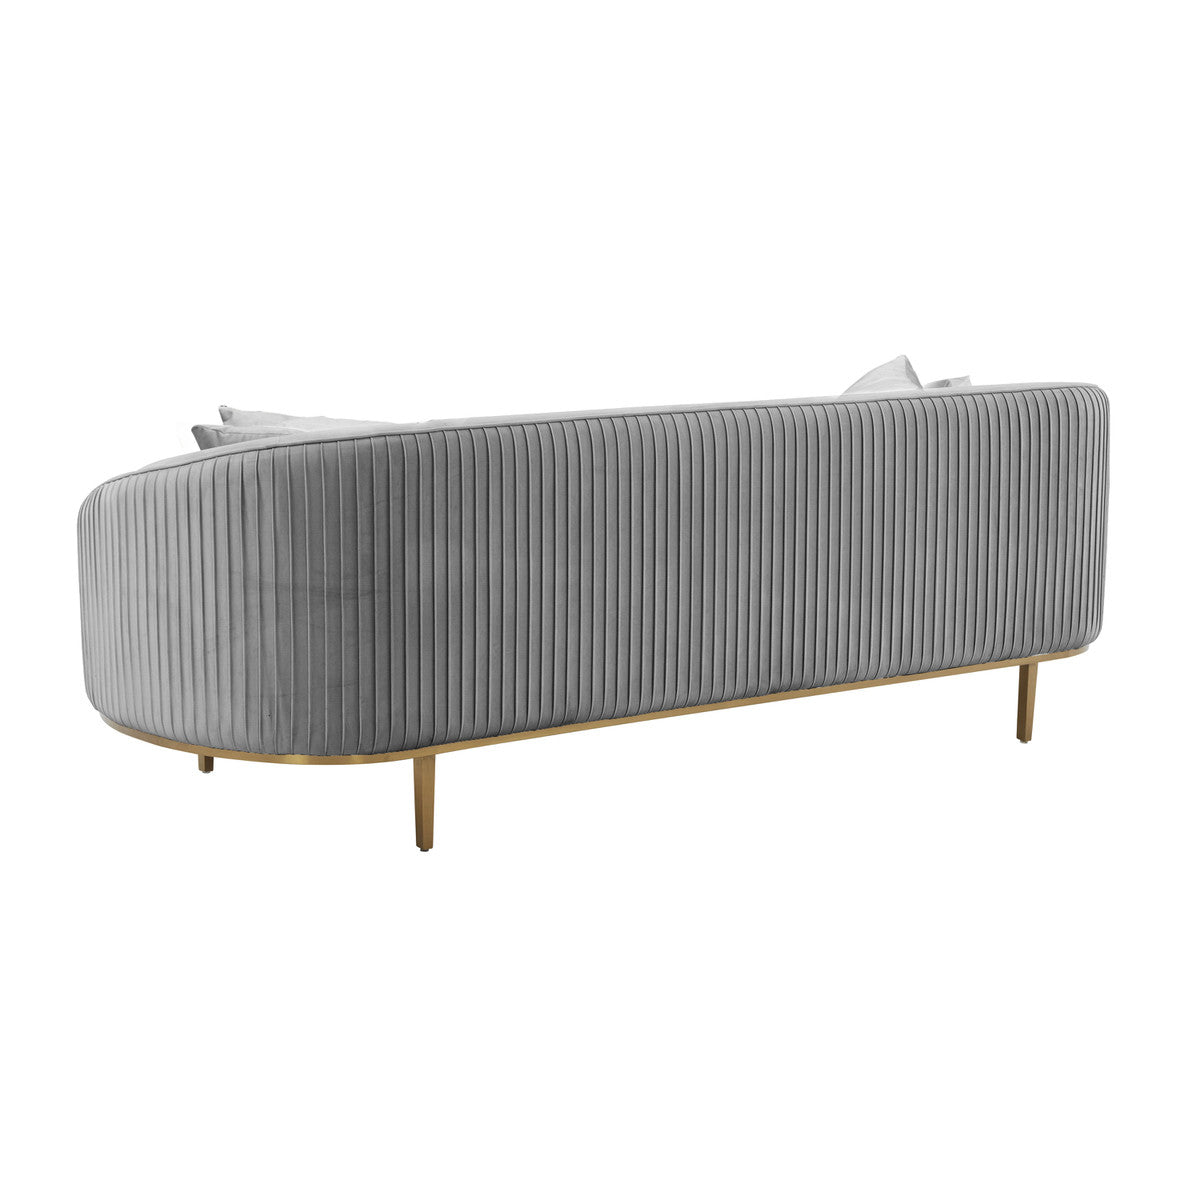 Michelle Light Grey Pleated Sofa - Luxury Living Collection